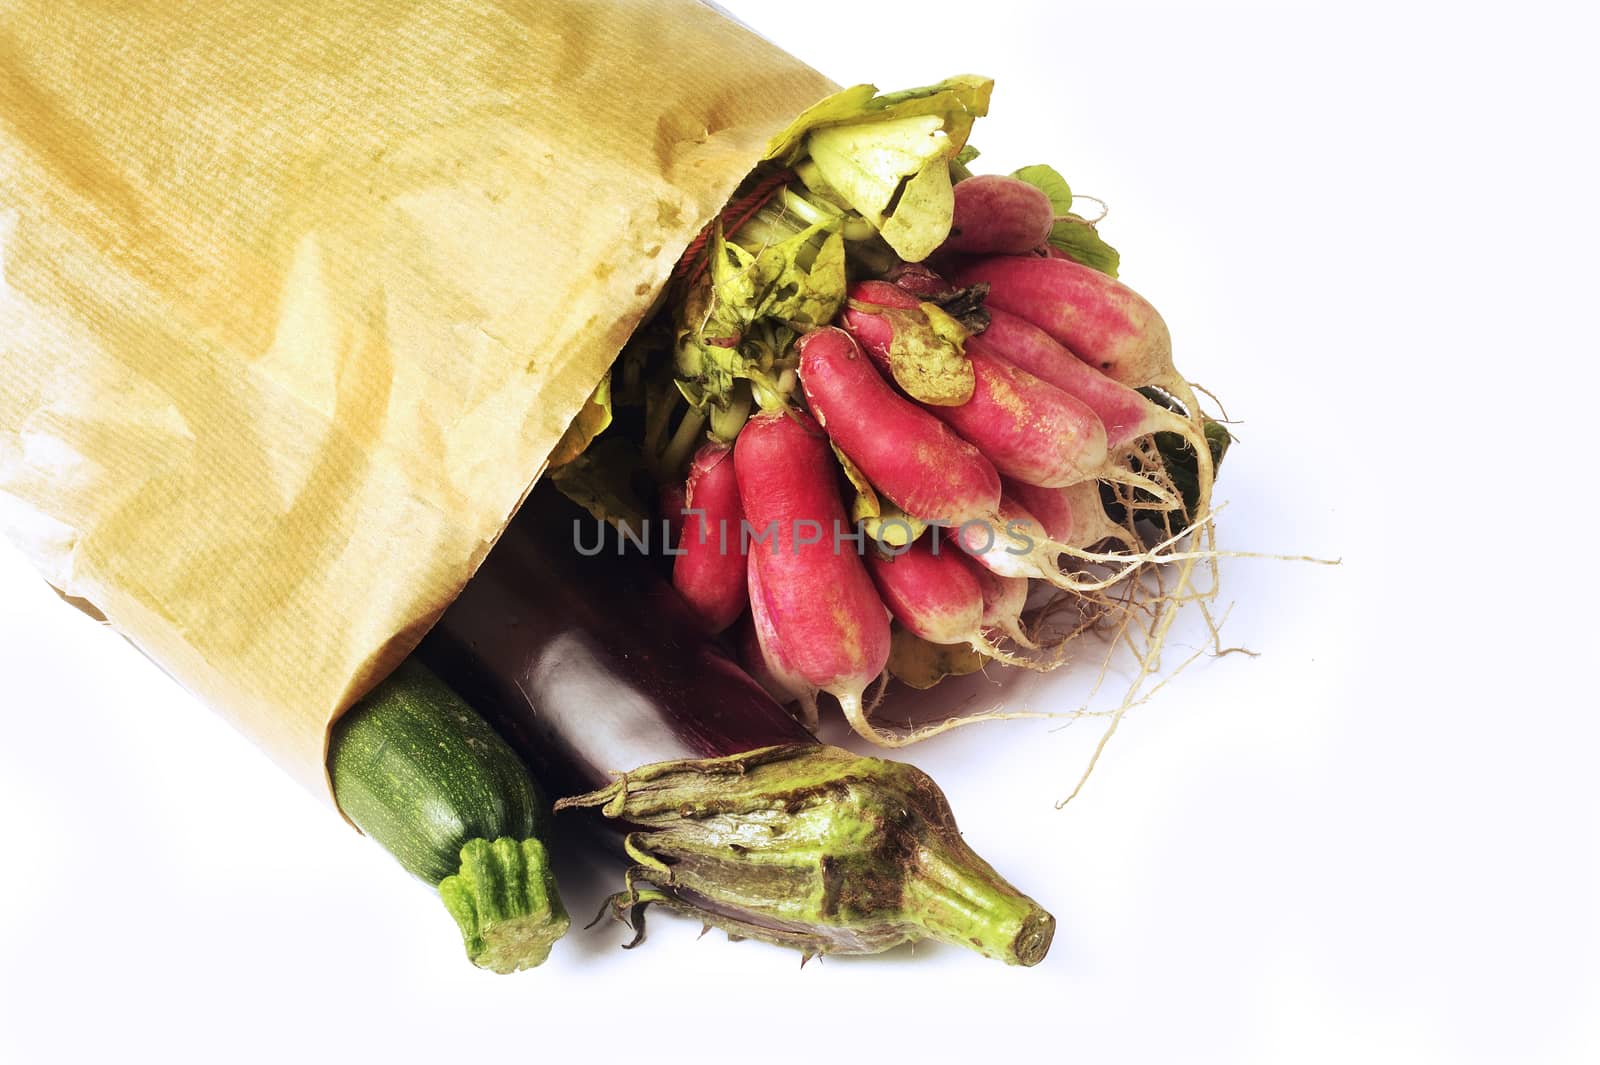 Vegetables in a bag of paper isolated on white background in stu by gillespaire